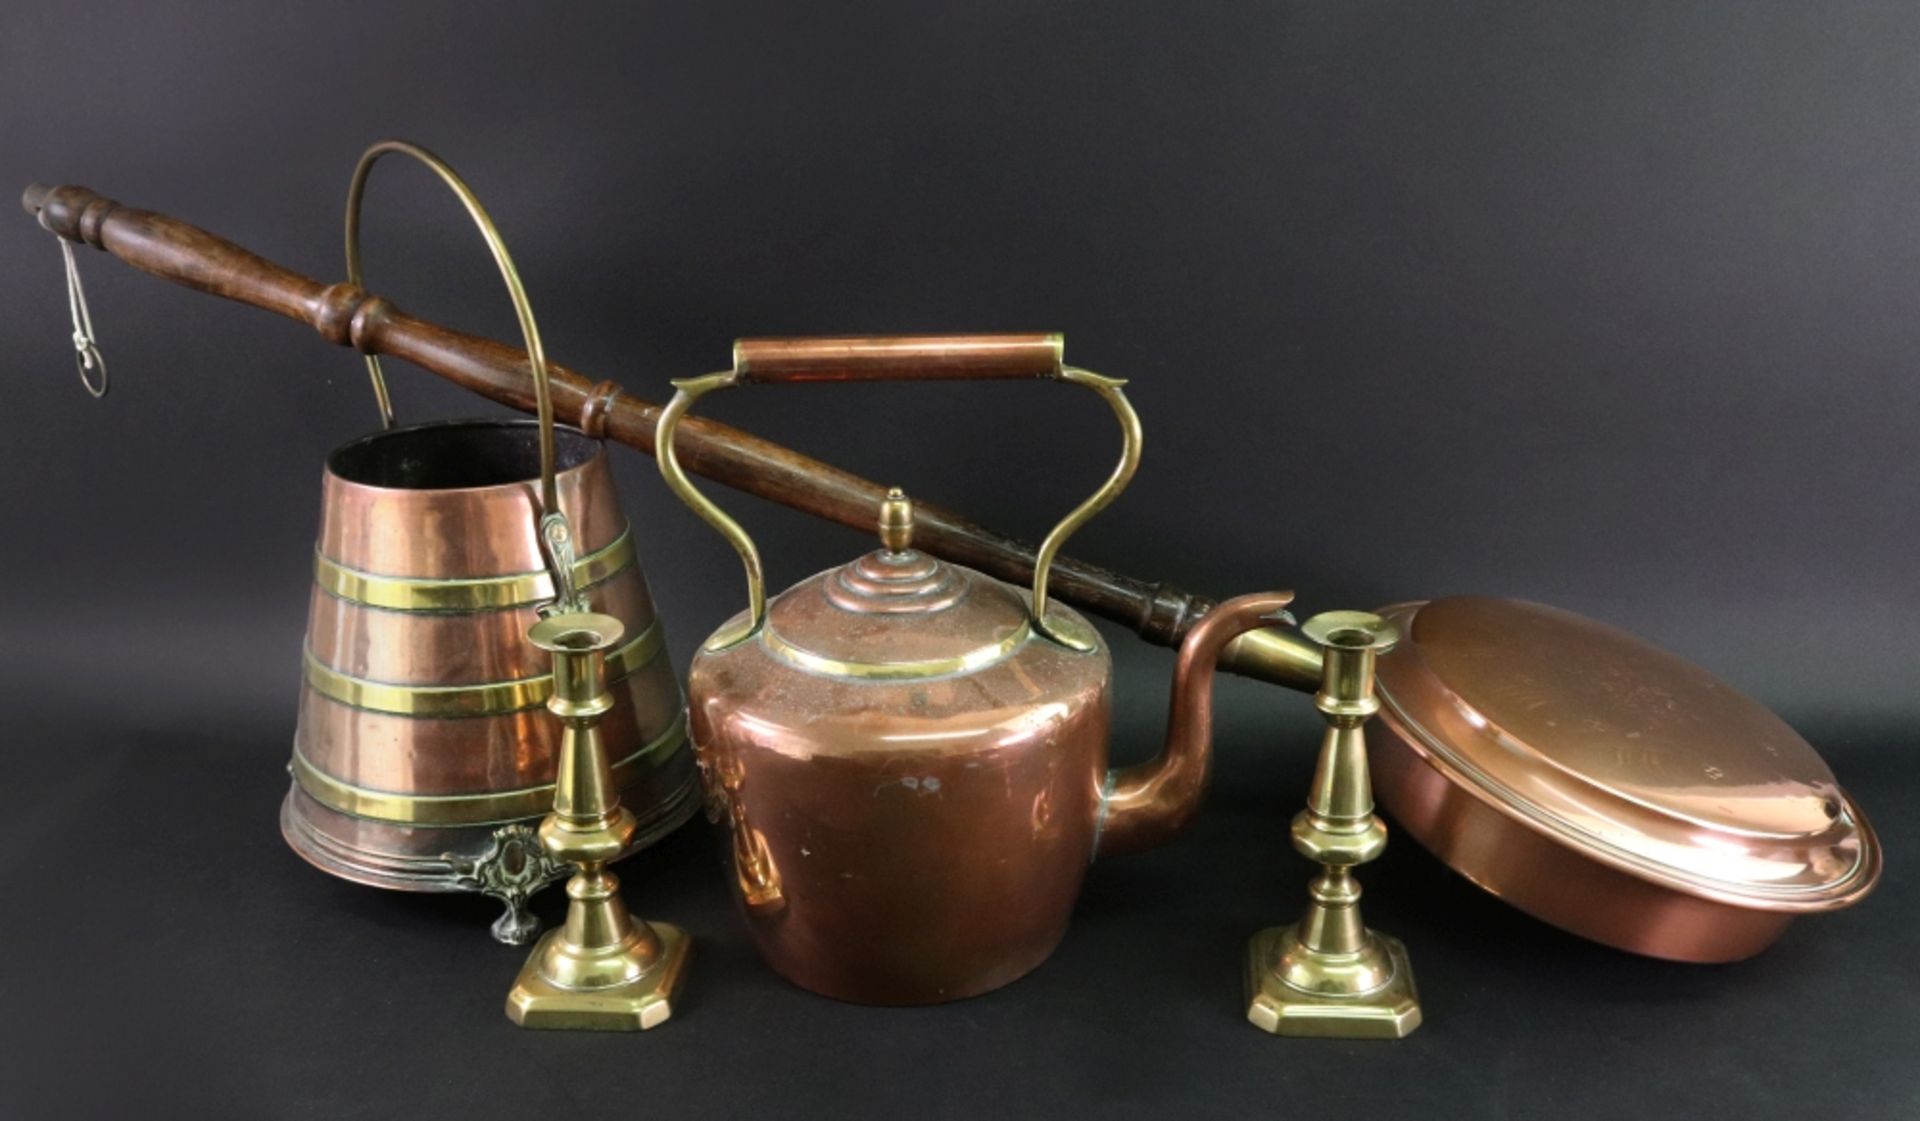 A large George III style copper and brass kettle, 31.